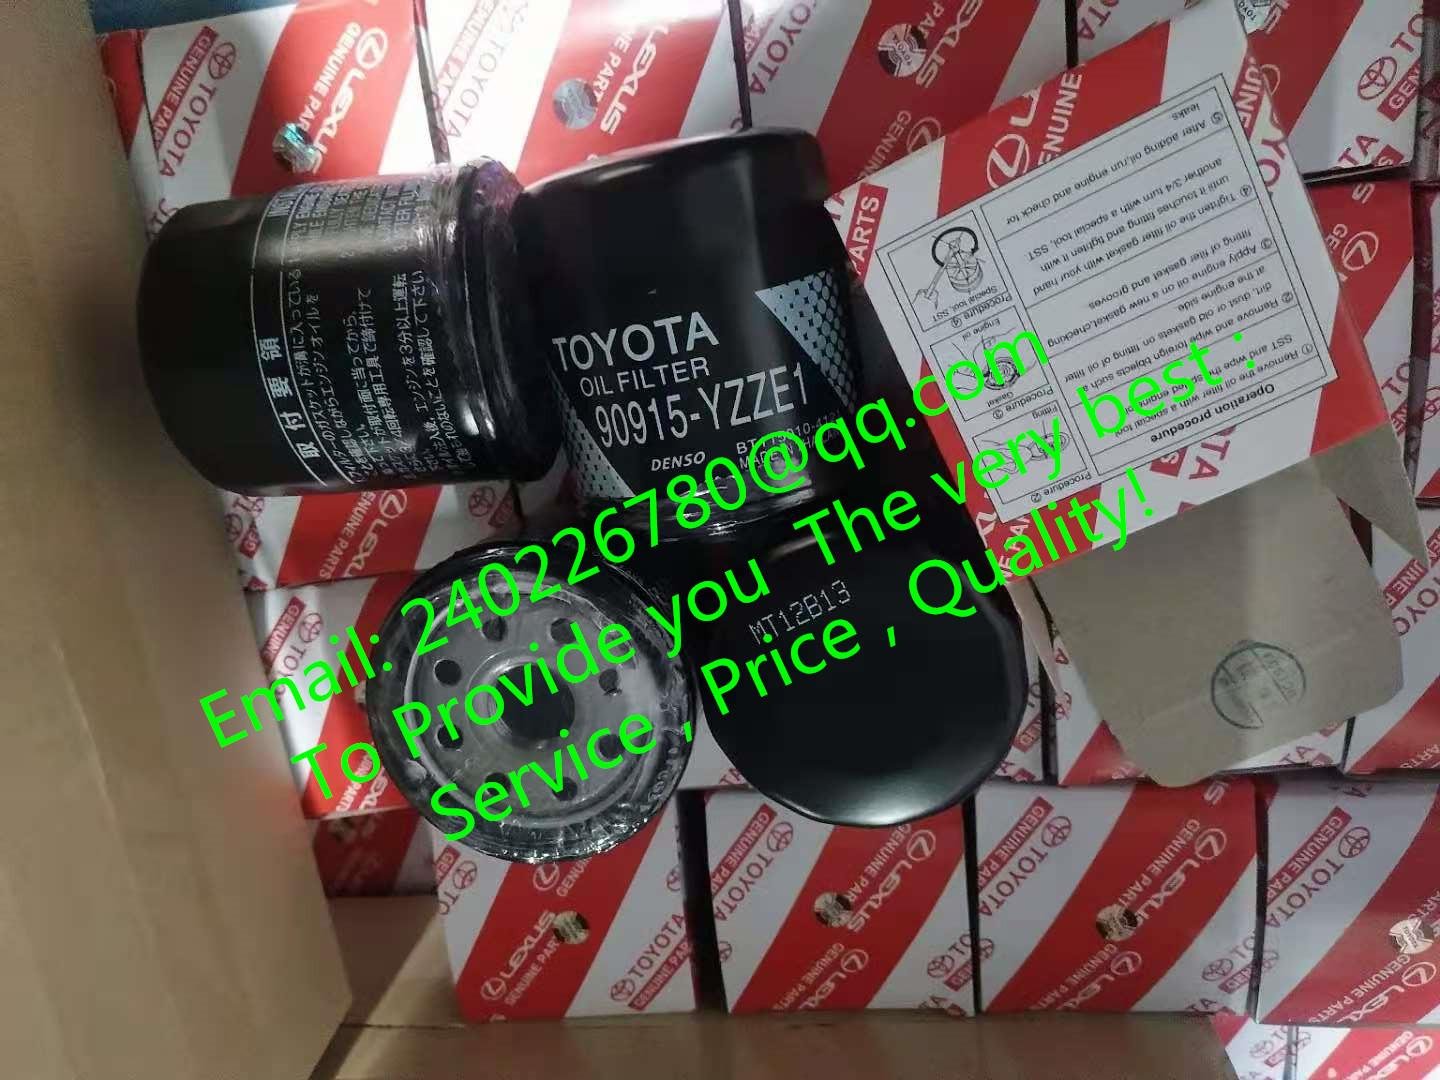 FOR TOYOTA Camry Oil Filter 90915-YZZE1 90915YZZE1 90915-10001 90915-03001